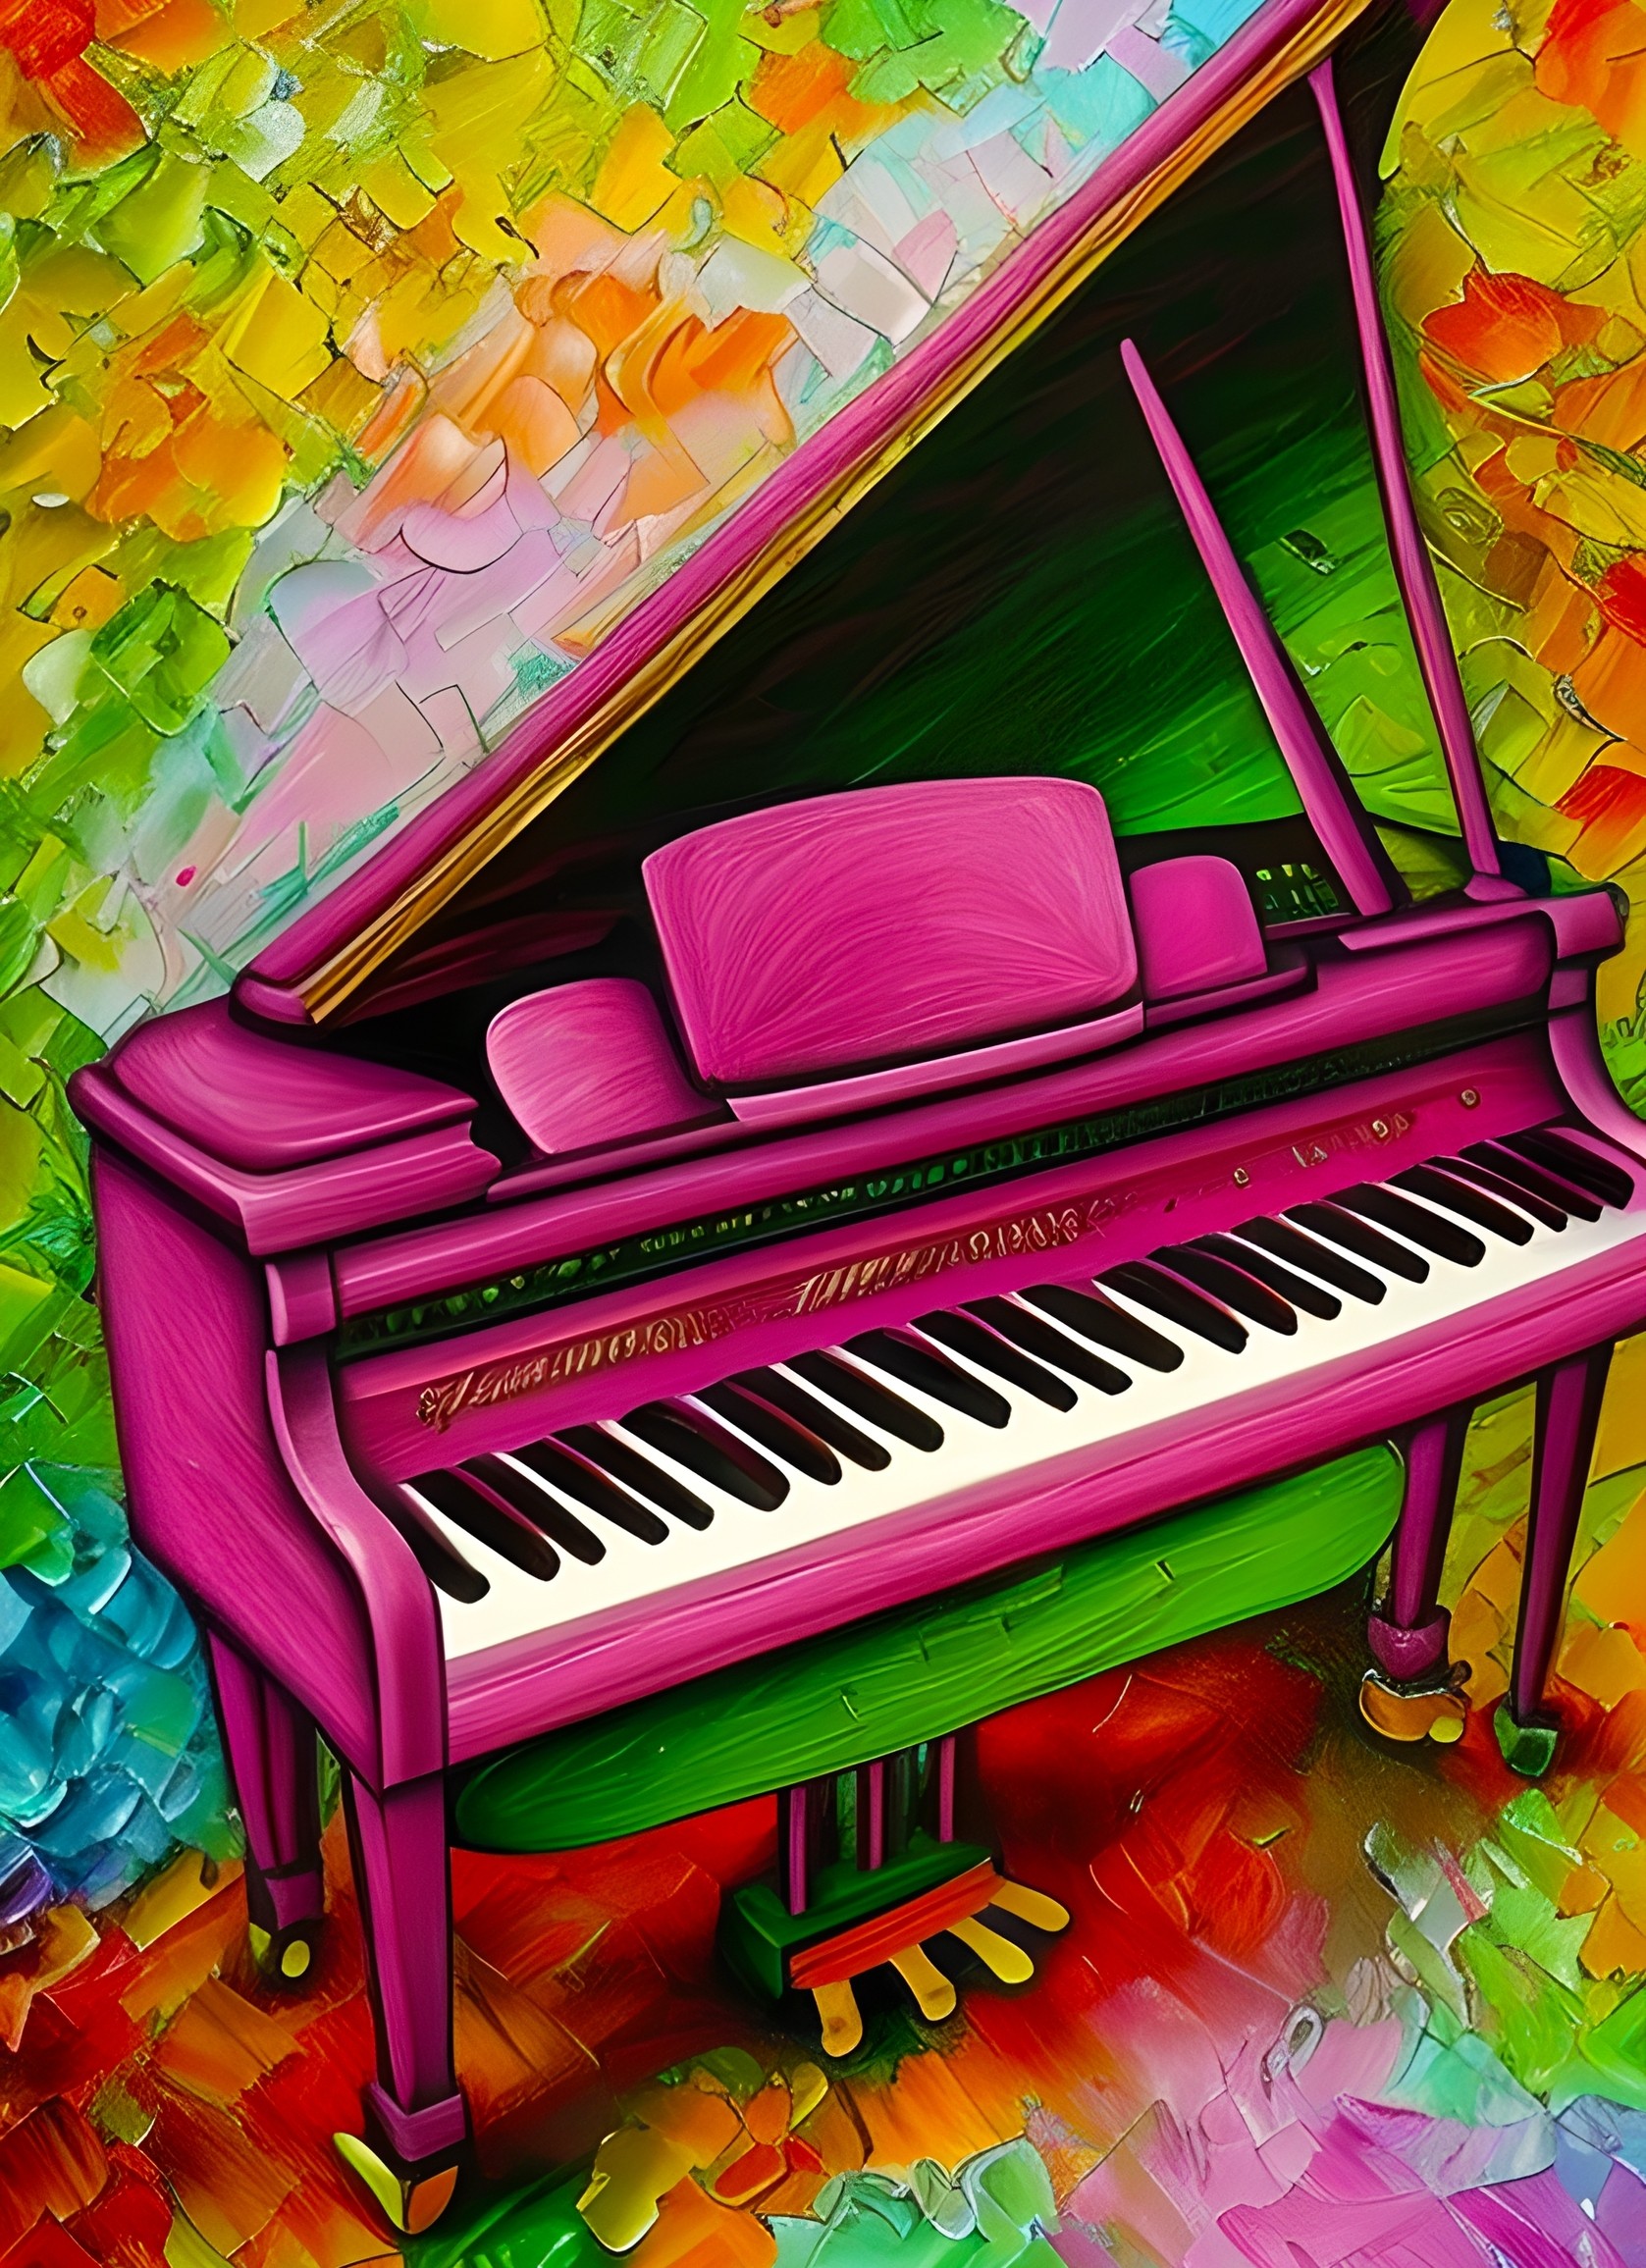 Piano Instrument Colourful Art Blank Greeting Card